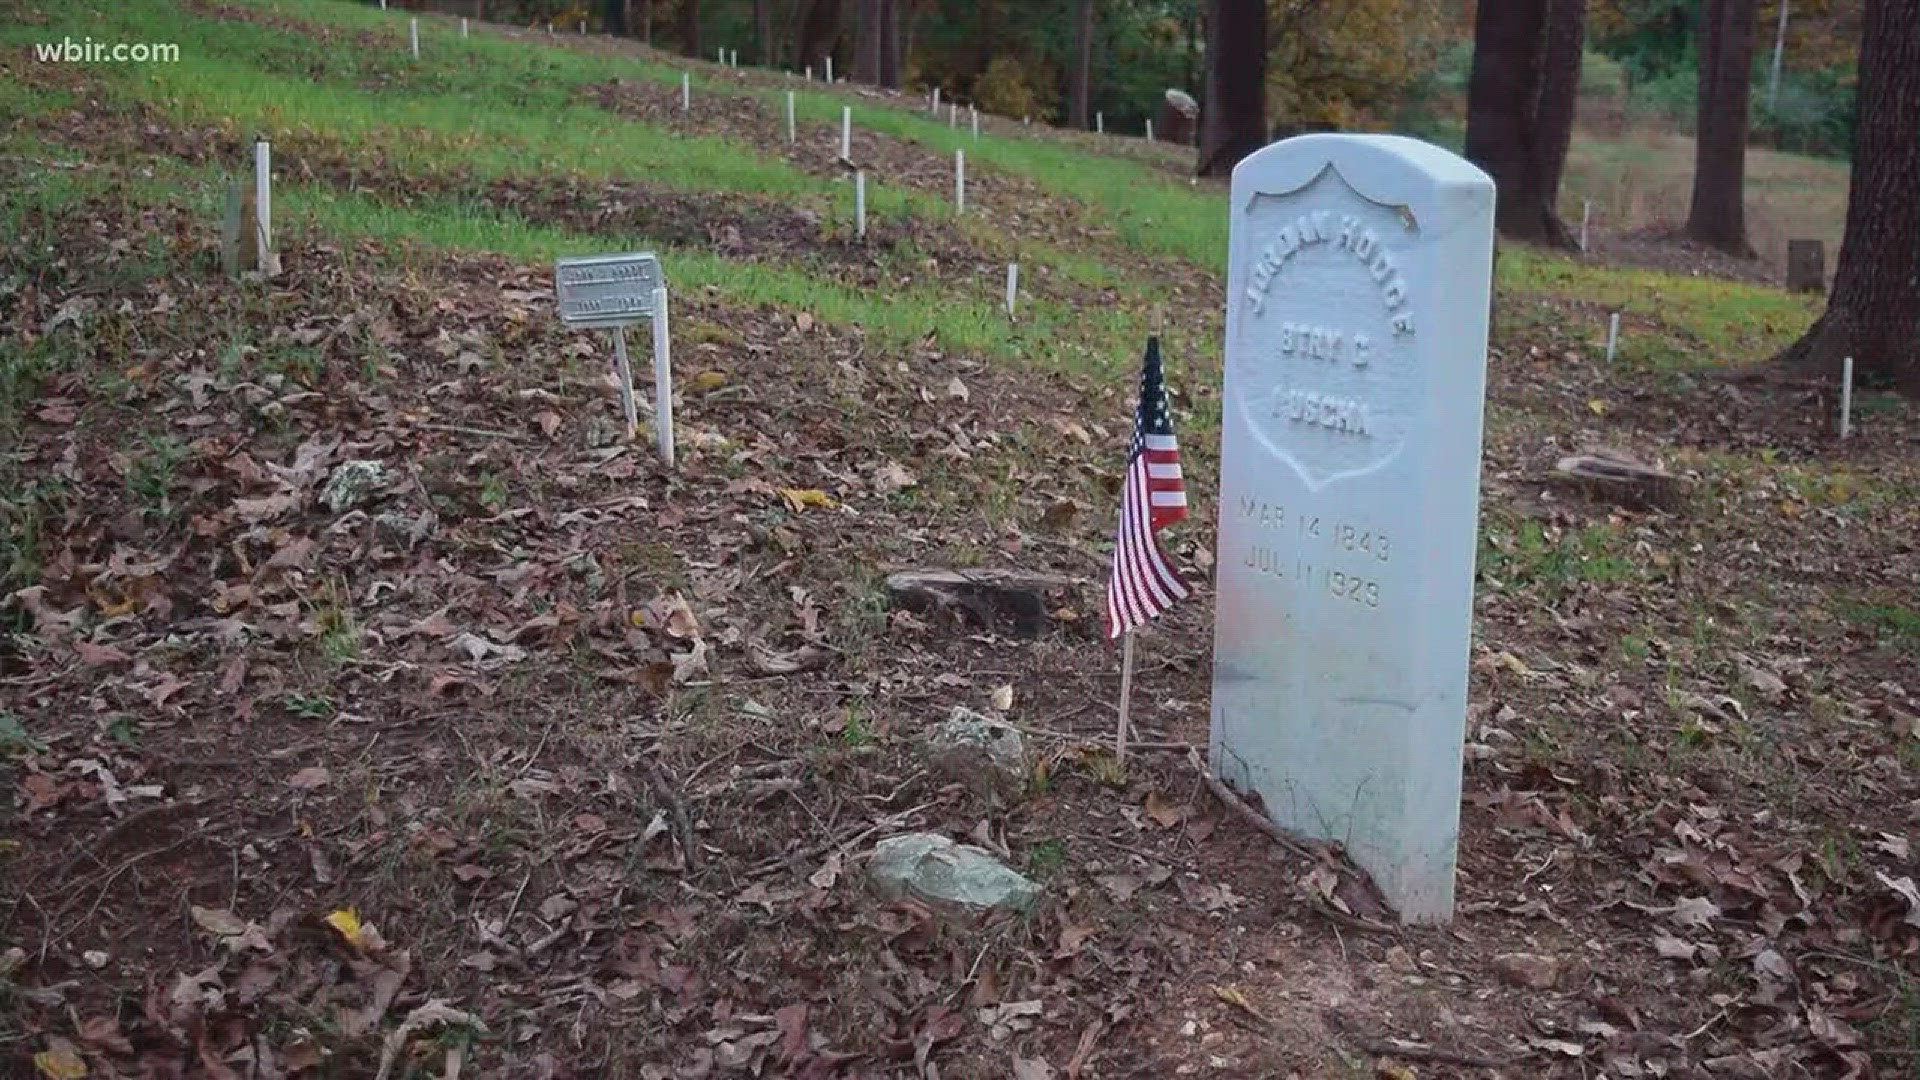 Nov. 2, 2017: Efforts to clean up a cemetery unearths hundreds of graves belonging to slaves and  veterans of the civil war and world war II.